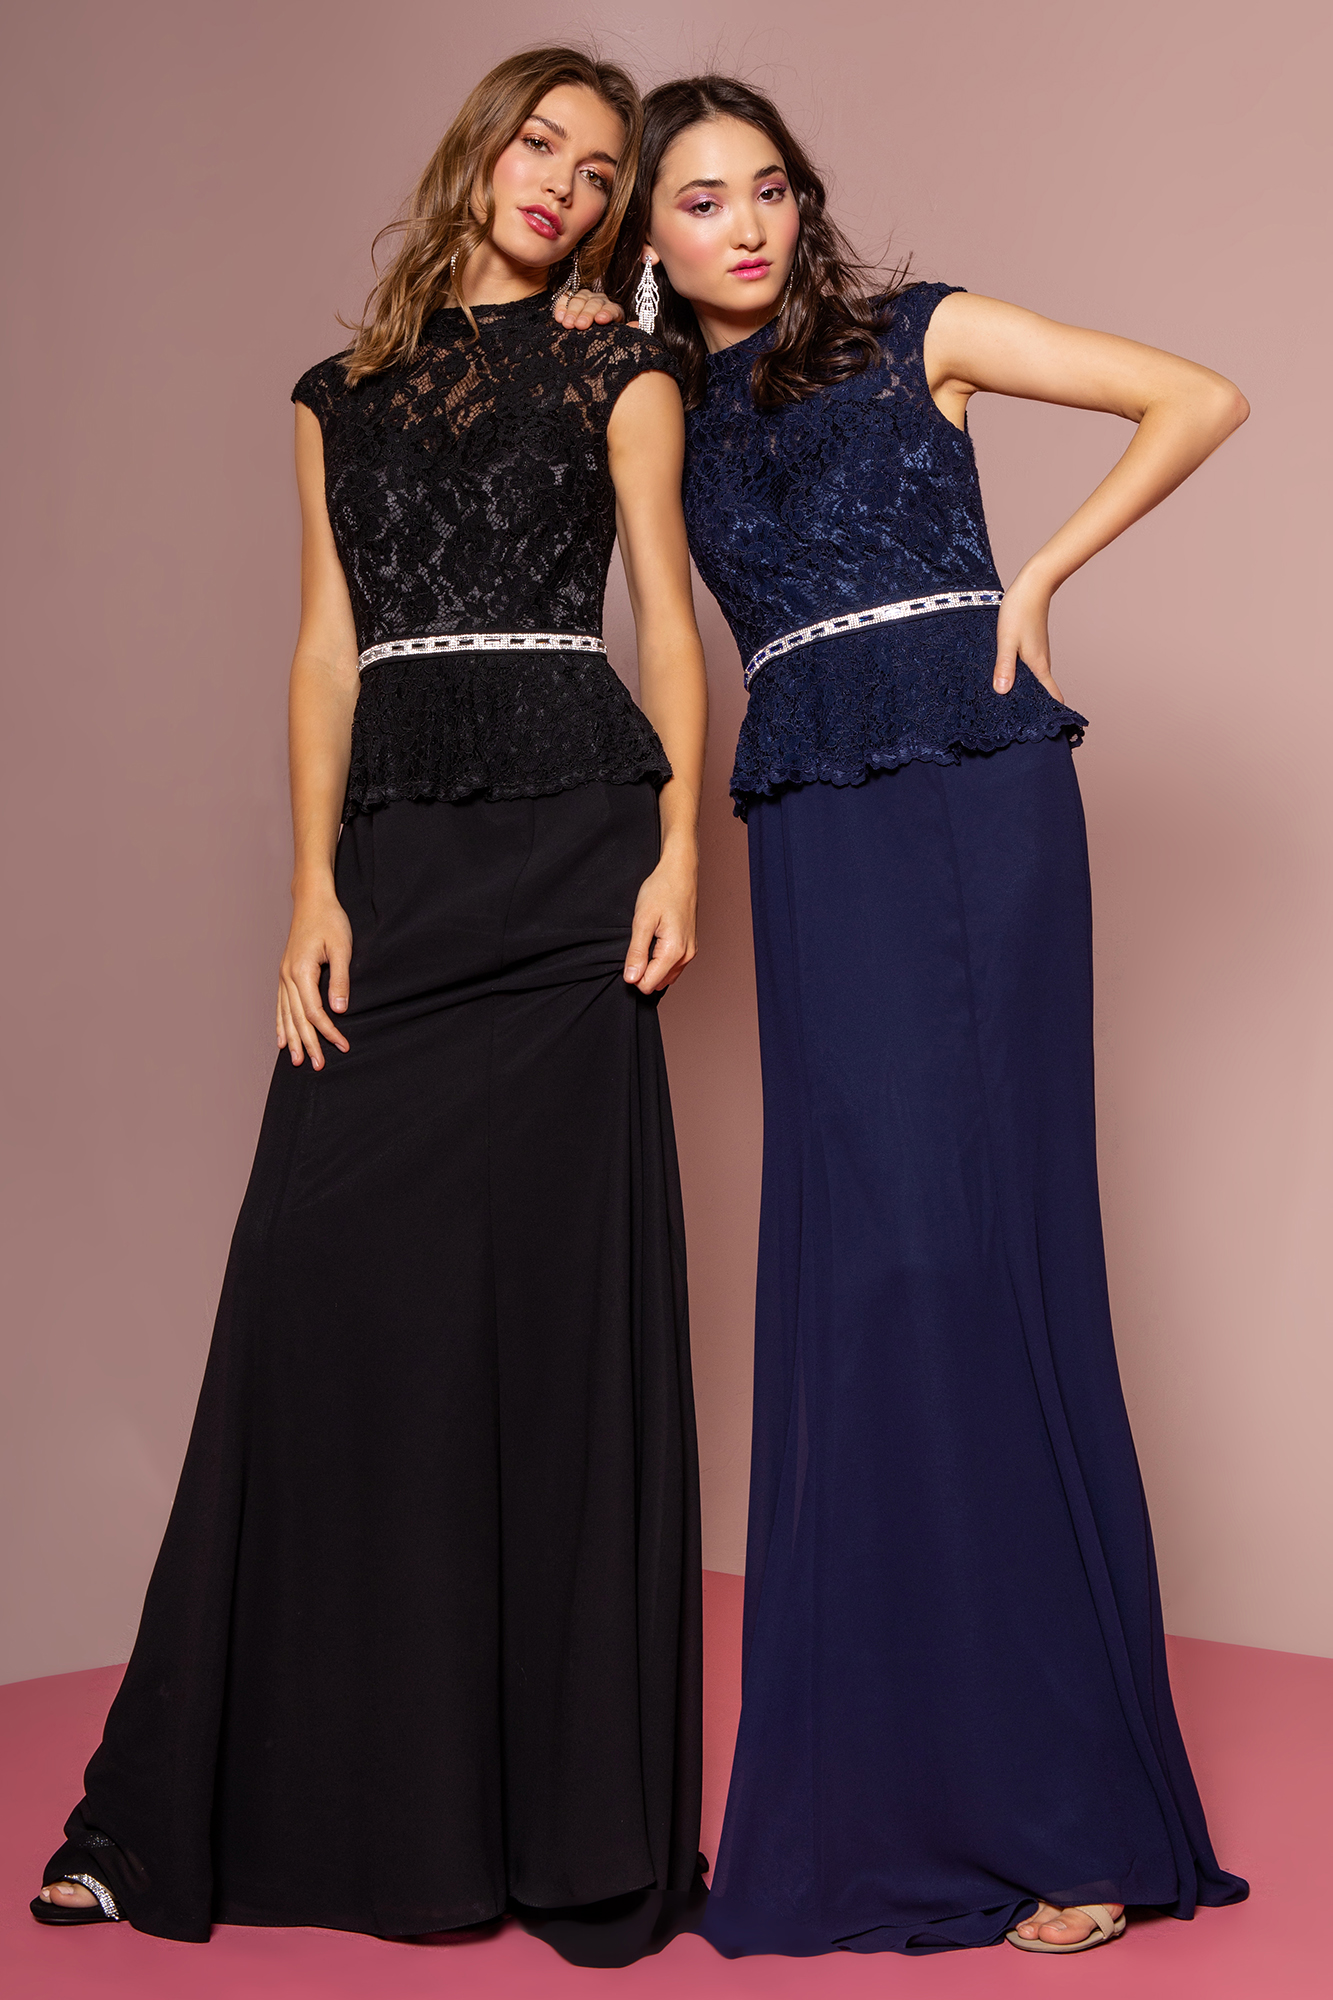 women in black and navy blue gowns